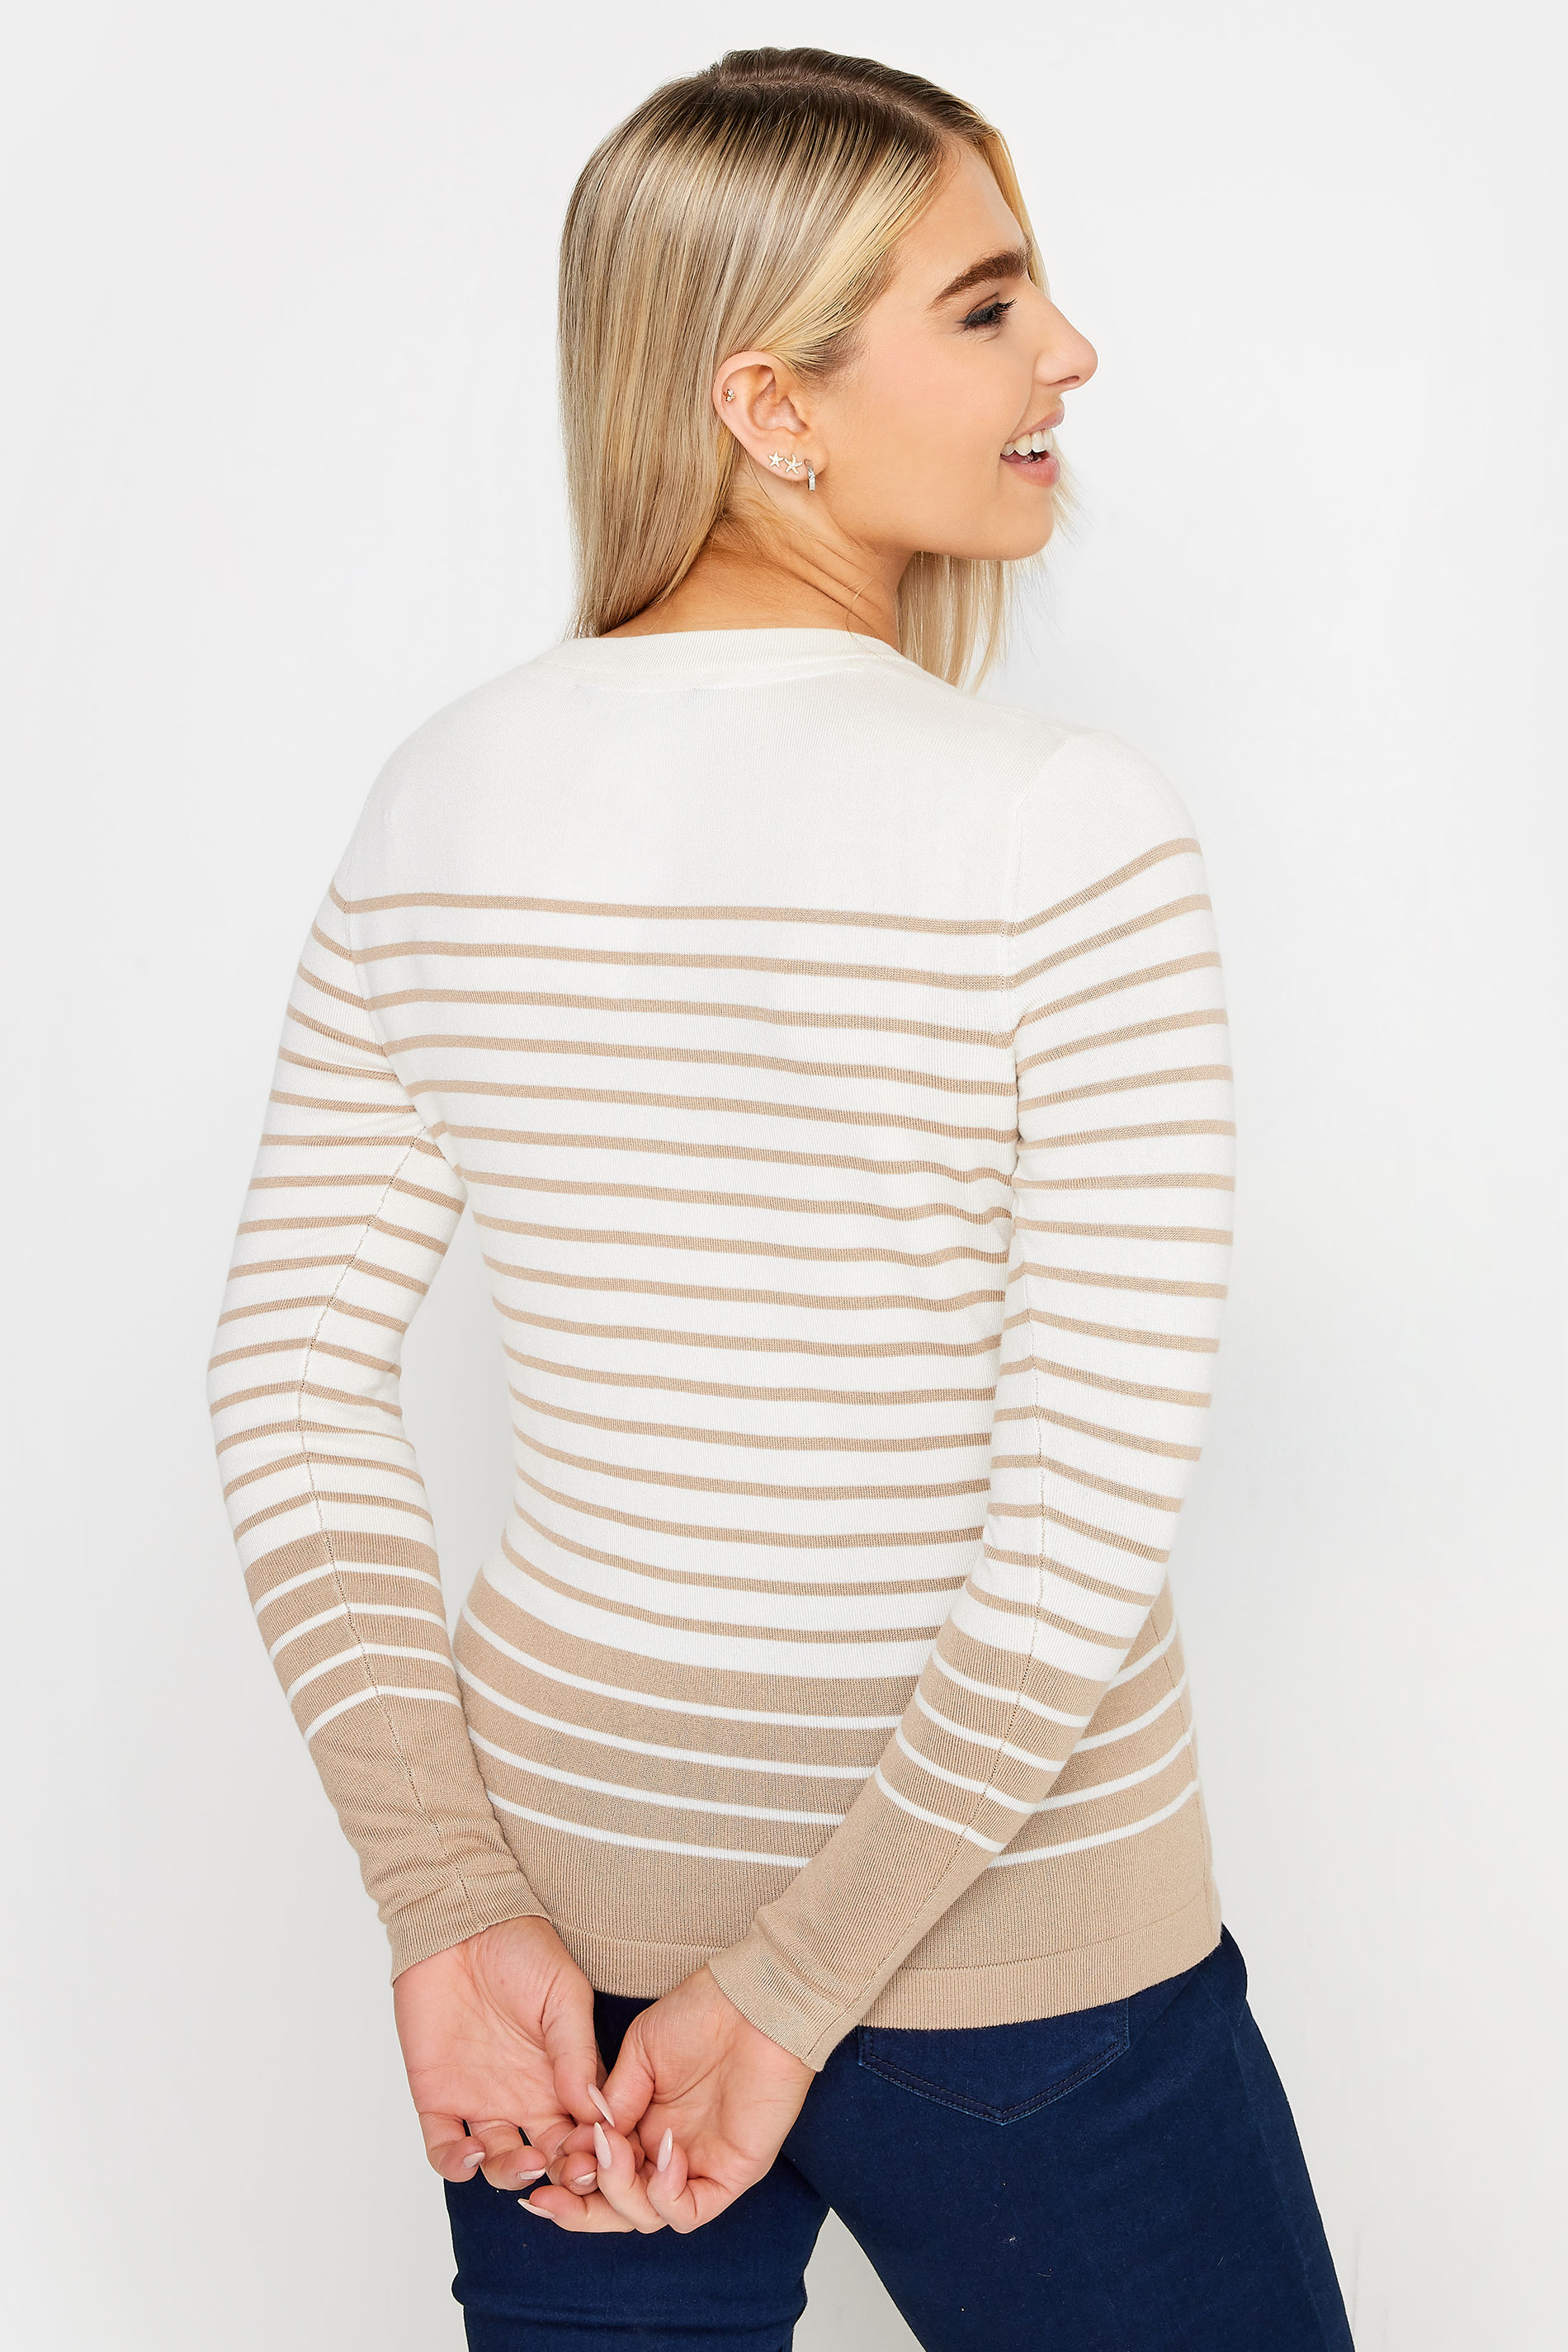 M&Co Ivory & Natural Brown Striped Jumper | M&Co 3